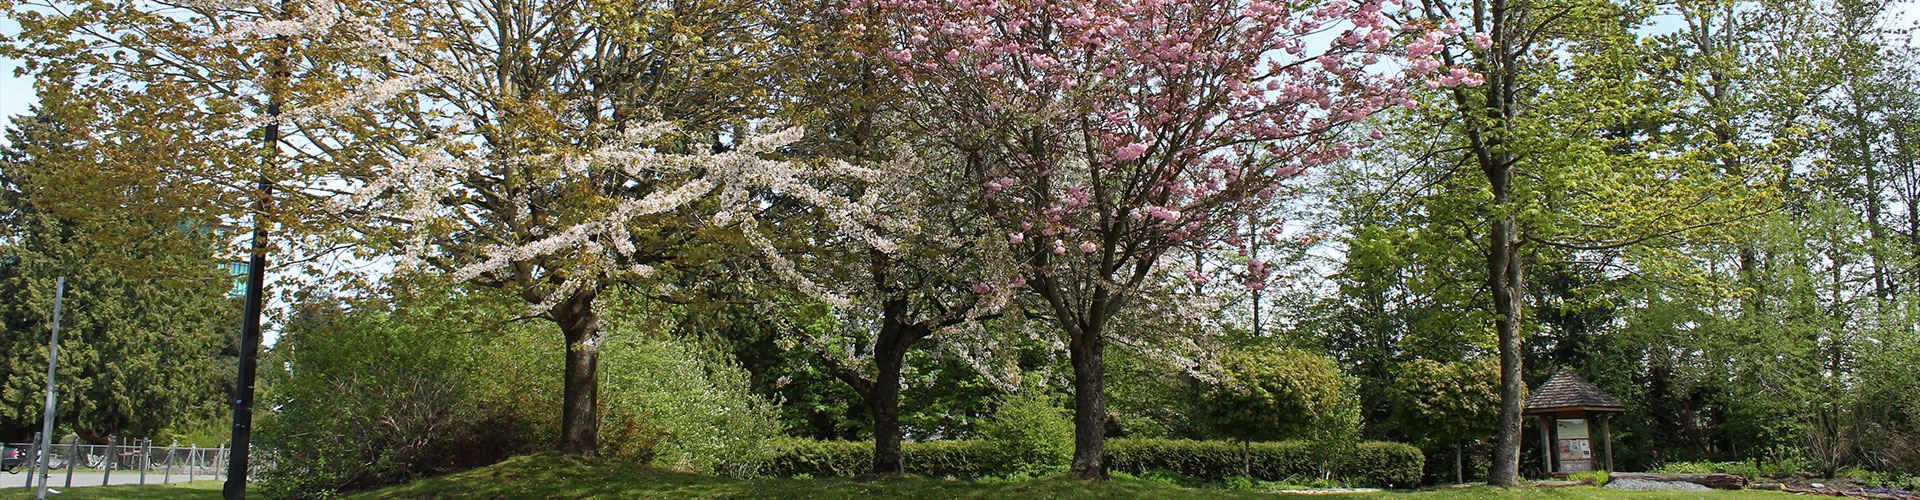 Green and Cherry Blossom trees on City property